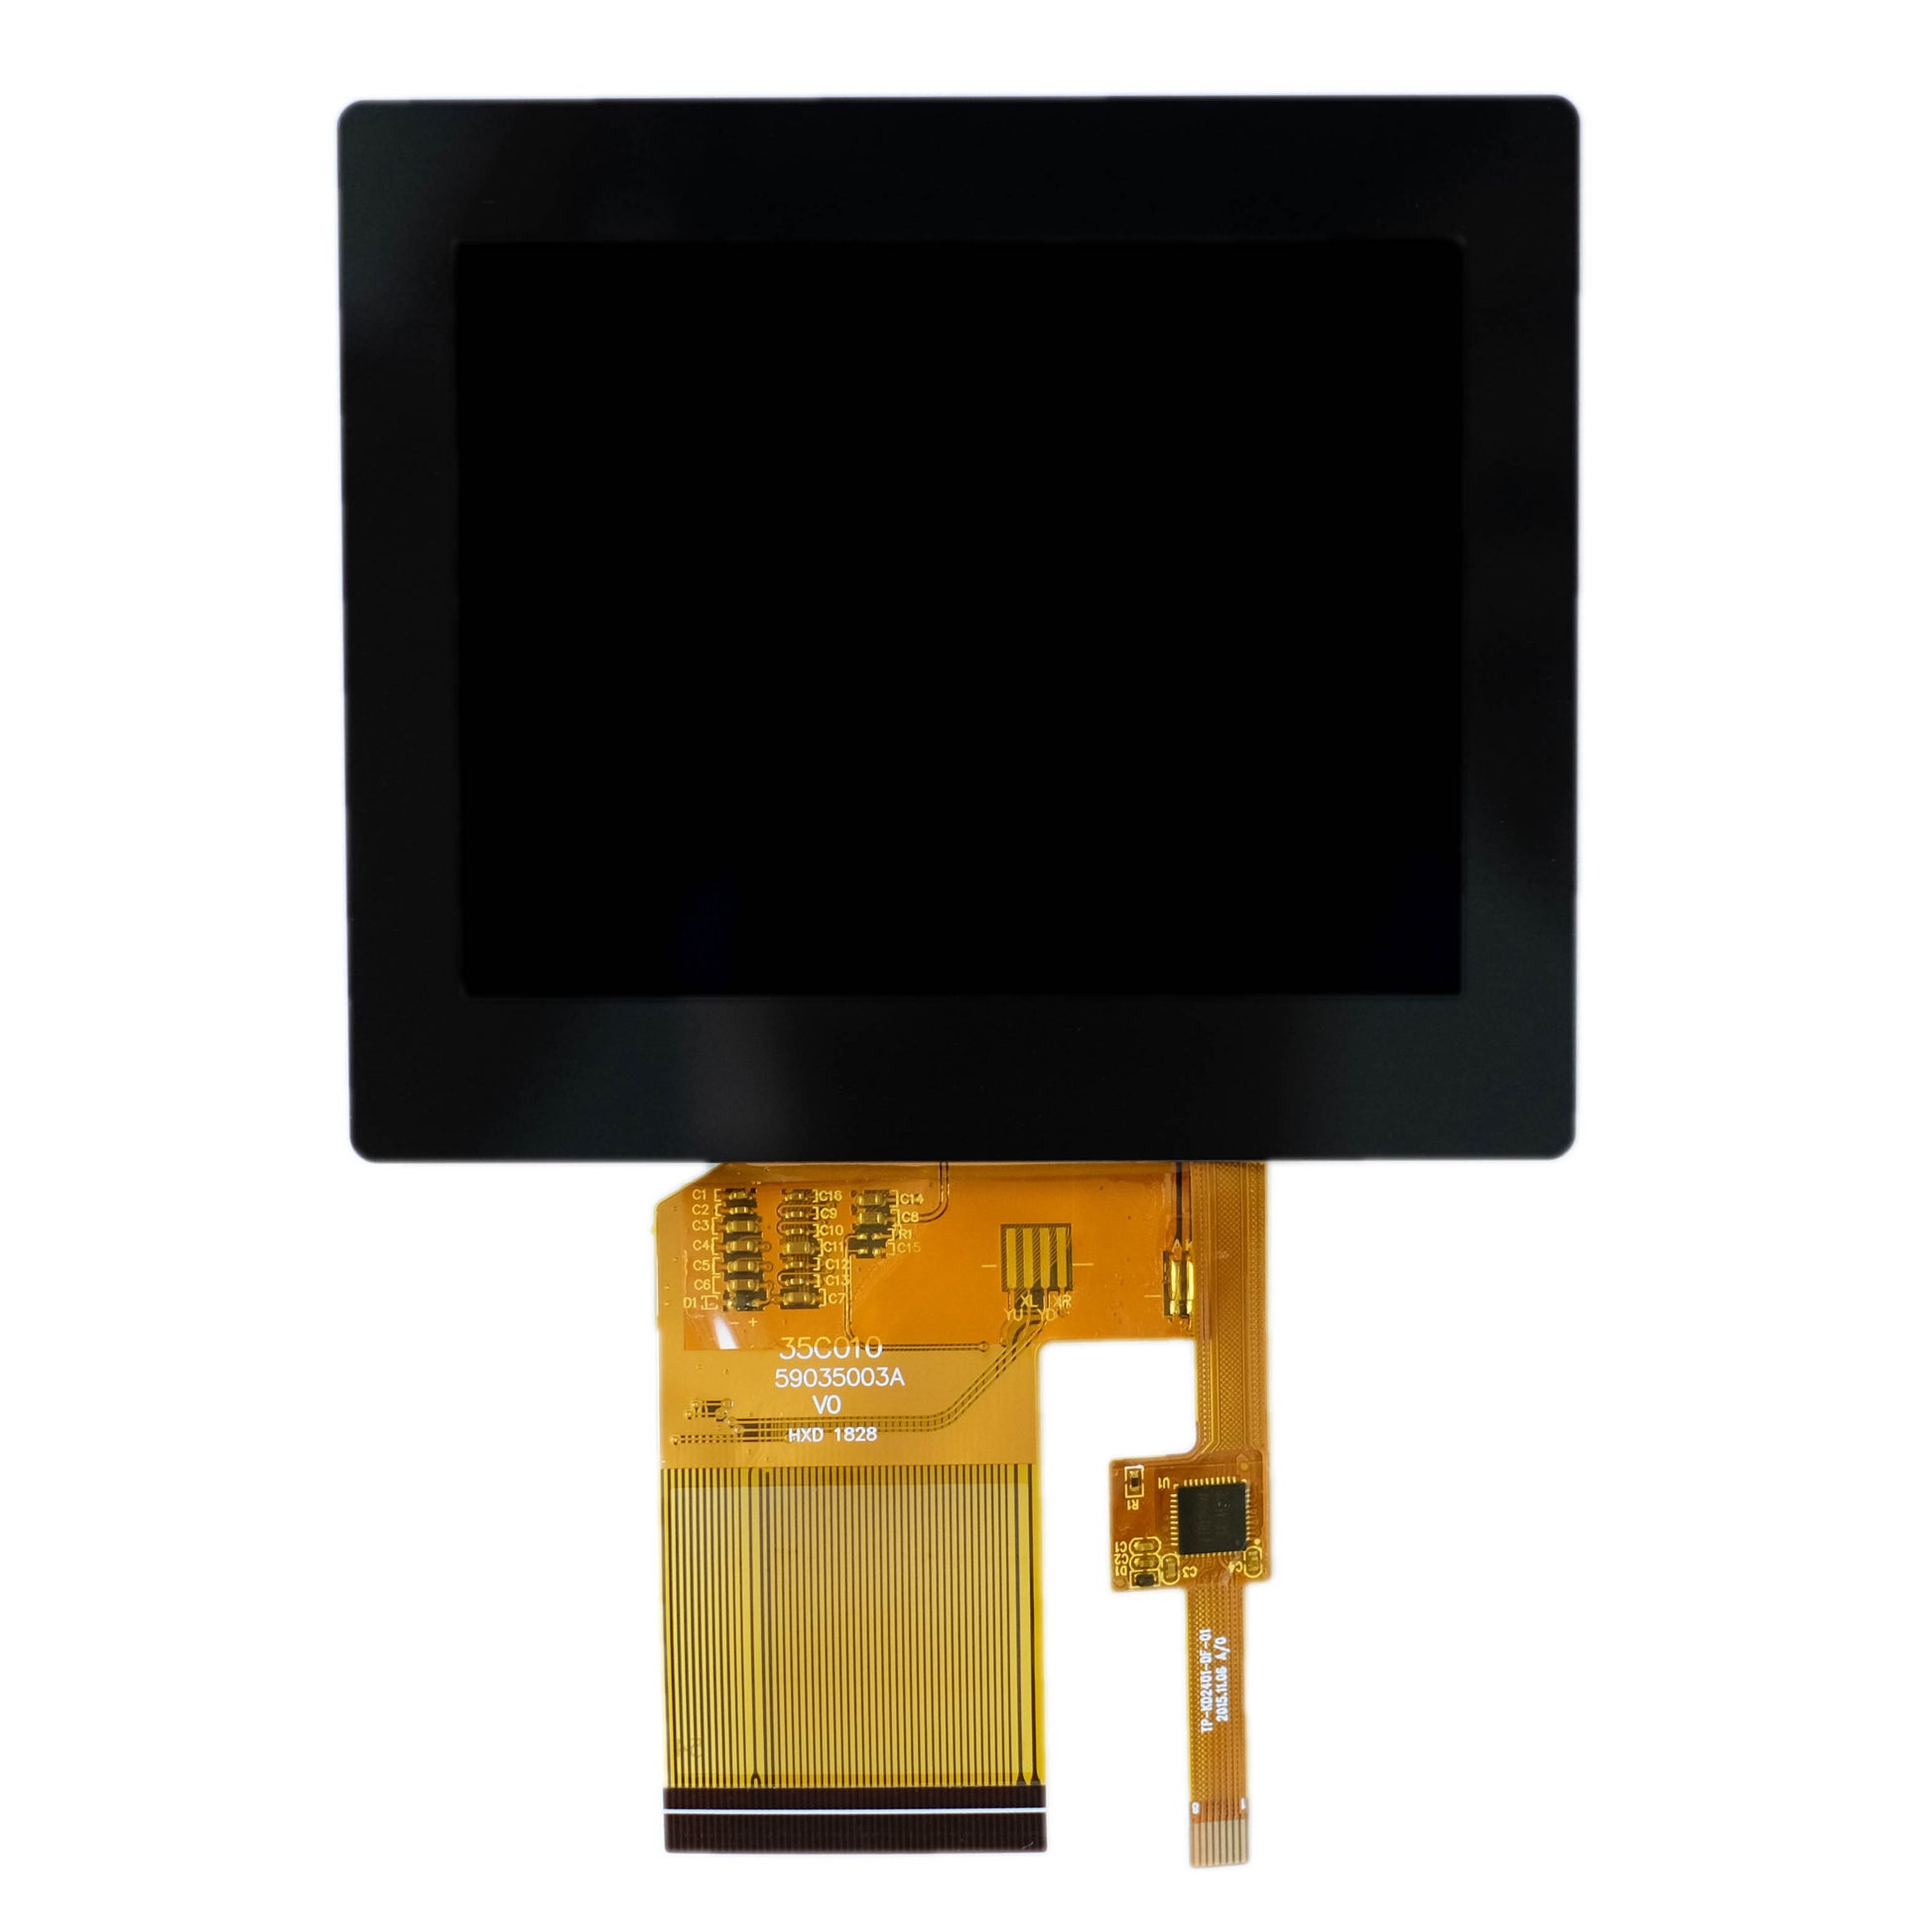 3.5-inch TFT display panel with 320x240 resolution, capacitive touch capability, and RGB interface